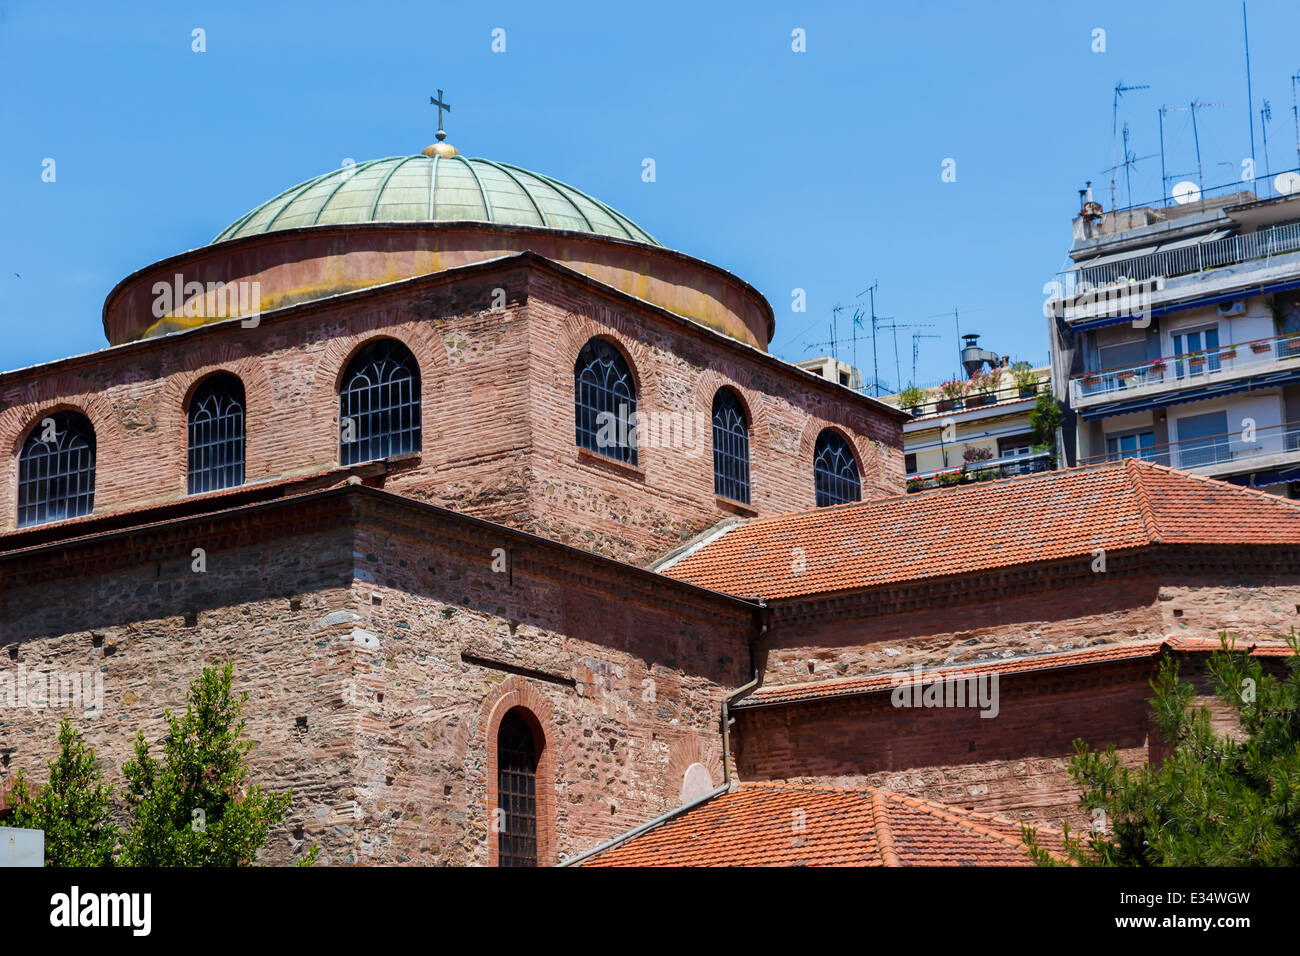 Church or monastery building details against blue sky in Thessaloniki, Greece Stock Photo